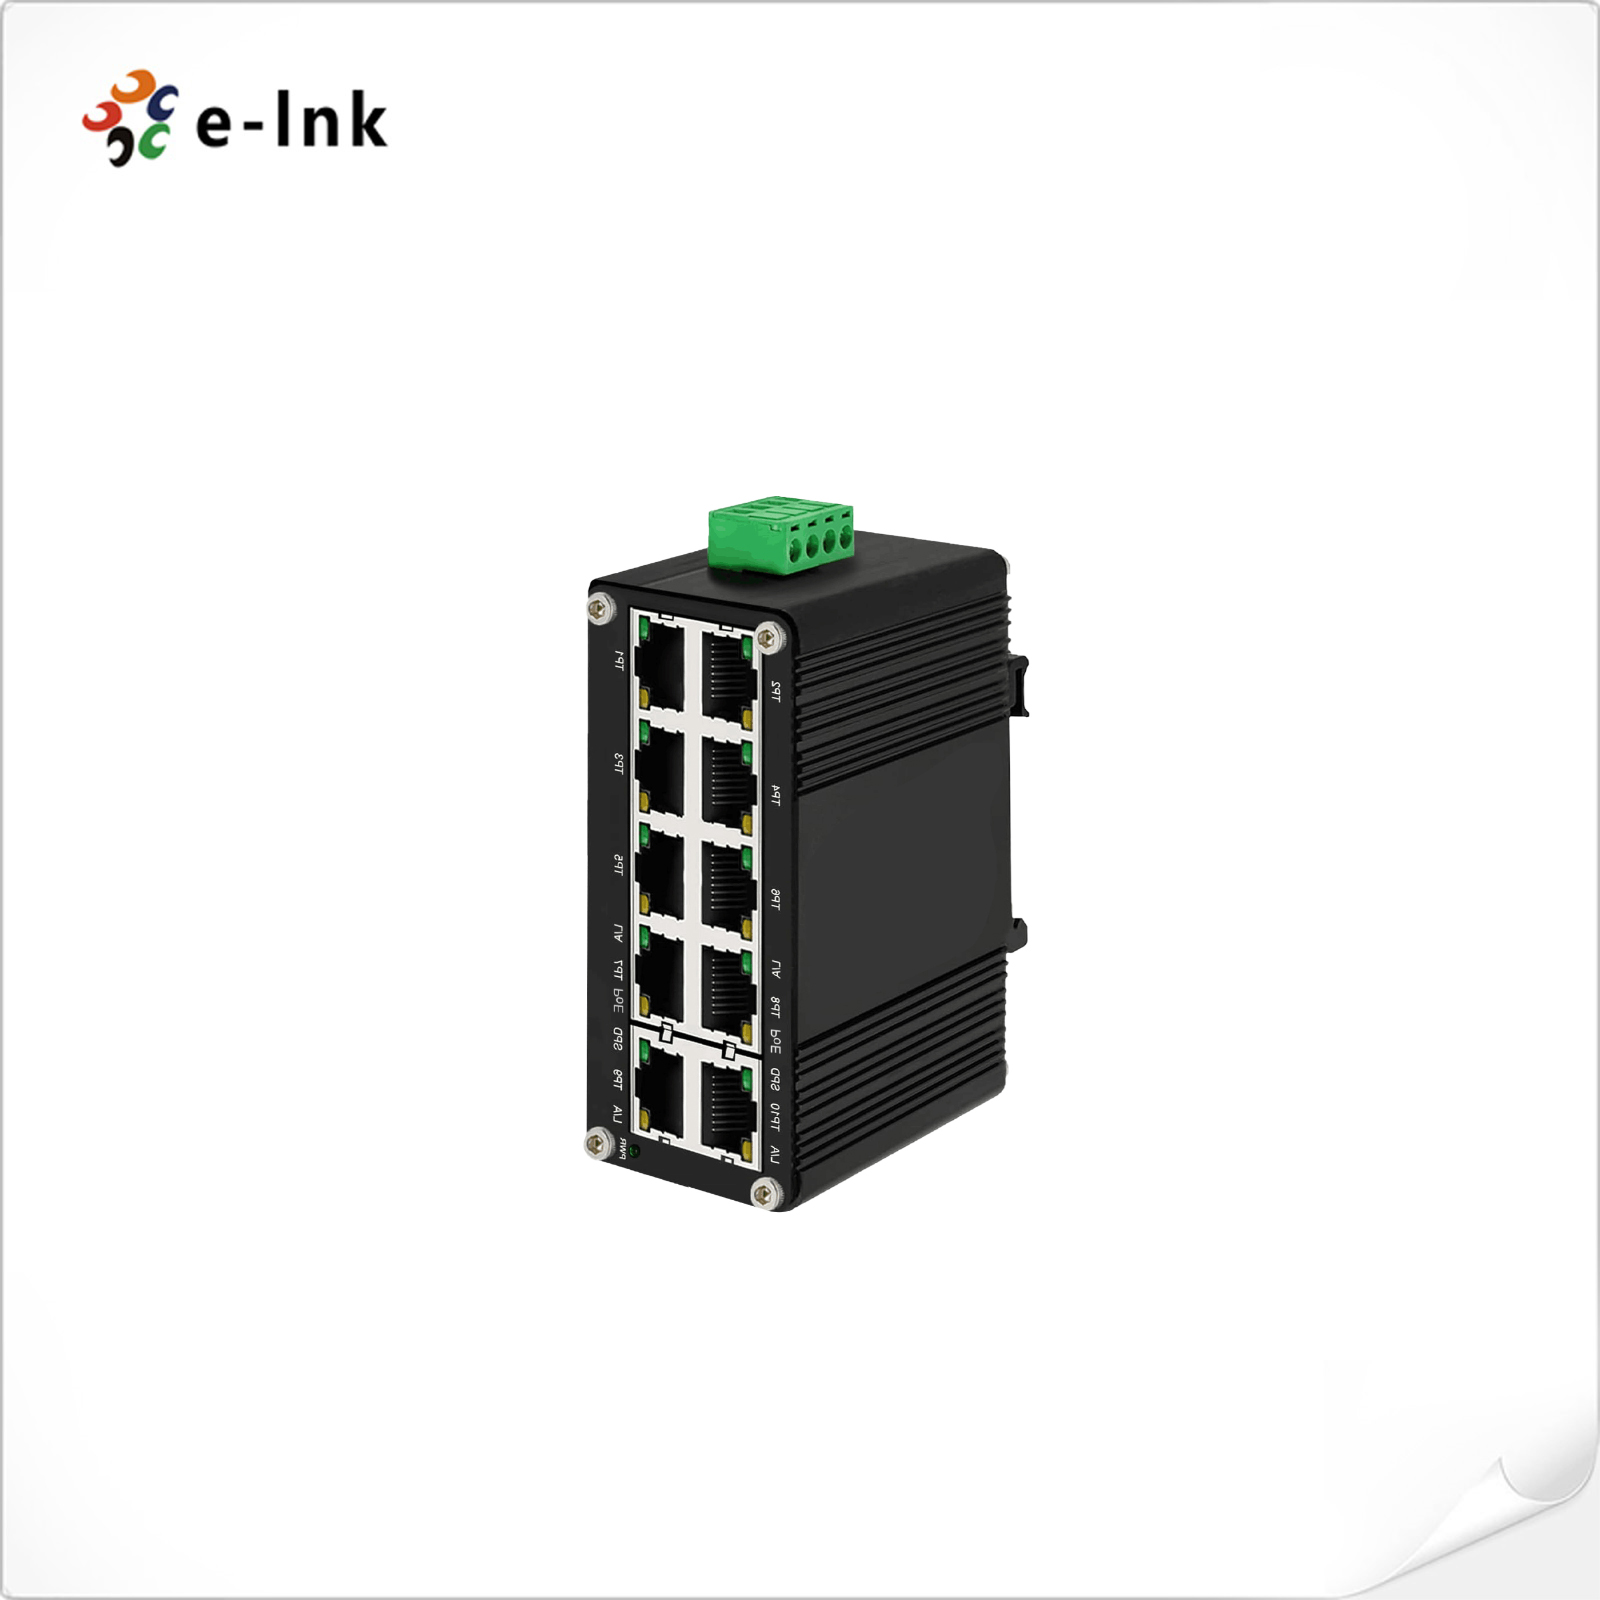 Mini Industrial 8-Port 10/100/1000T 802.3at PoE + 2-Port 10/100/1000T Compact Ethernet Switch